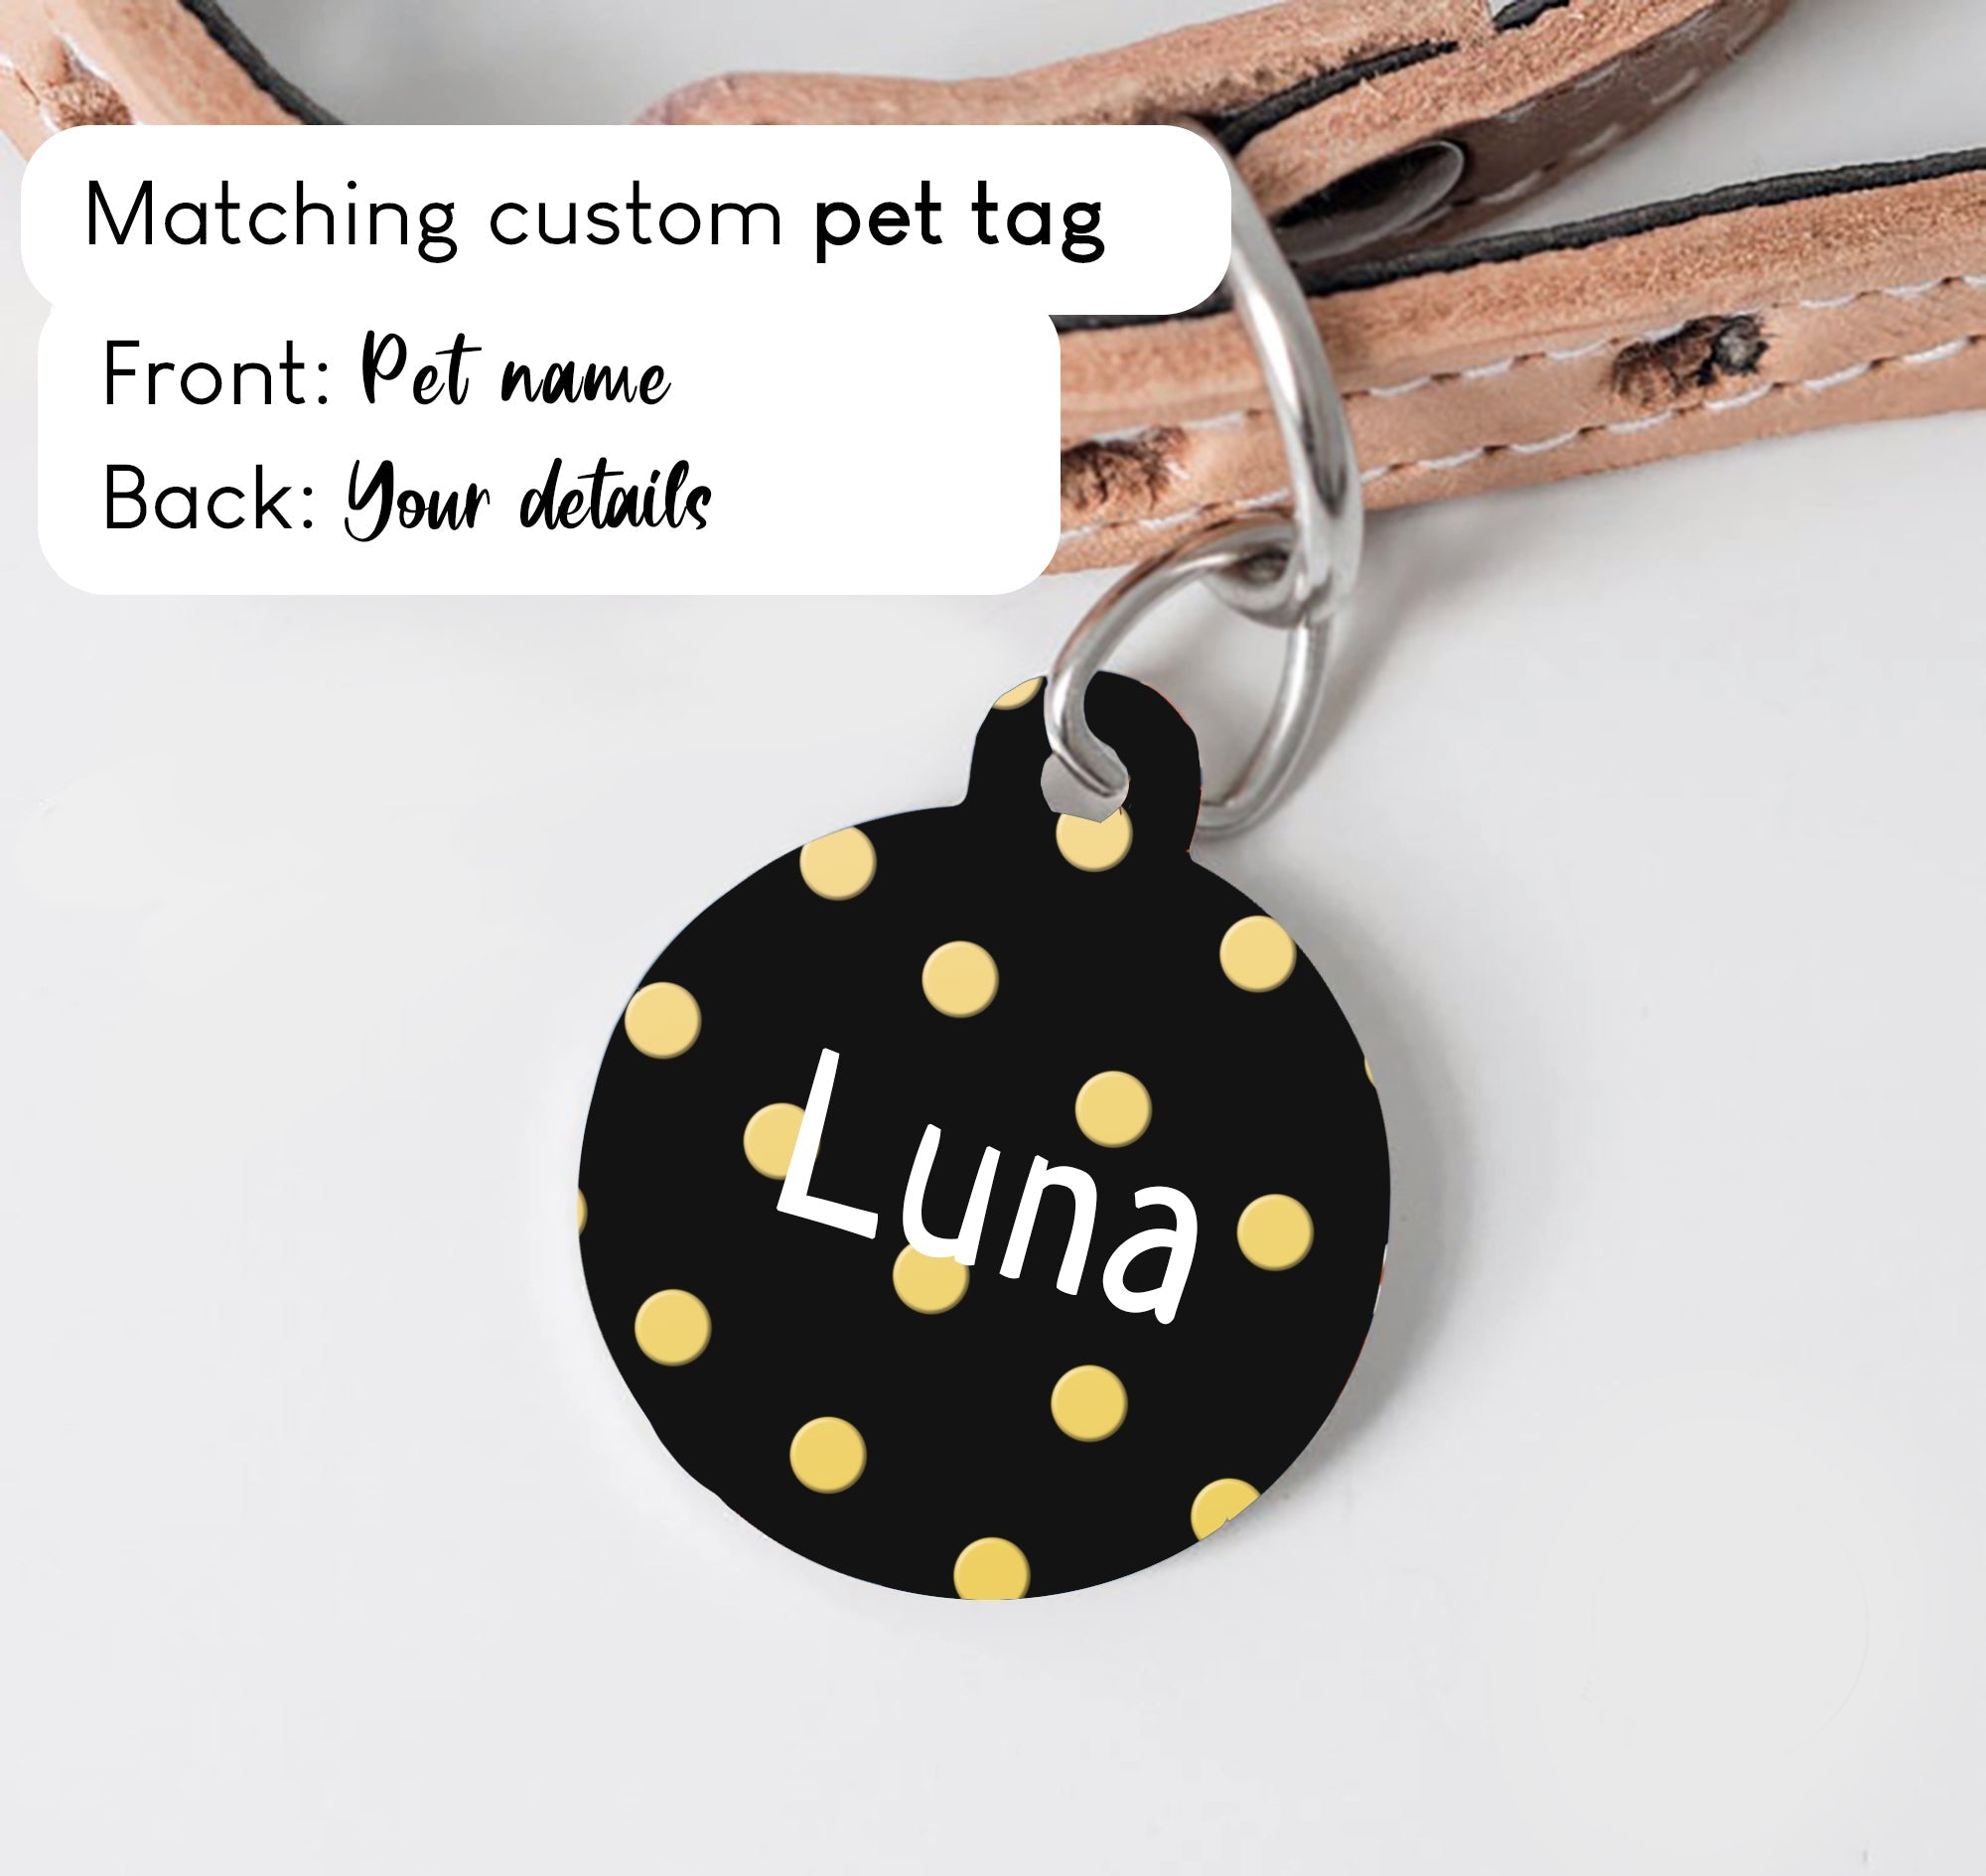 Black with Golden Polka Dots Dog Collar - S-L sizes with custom matching pet tag - Adventures of Rubi